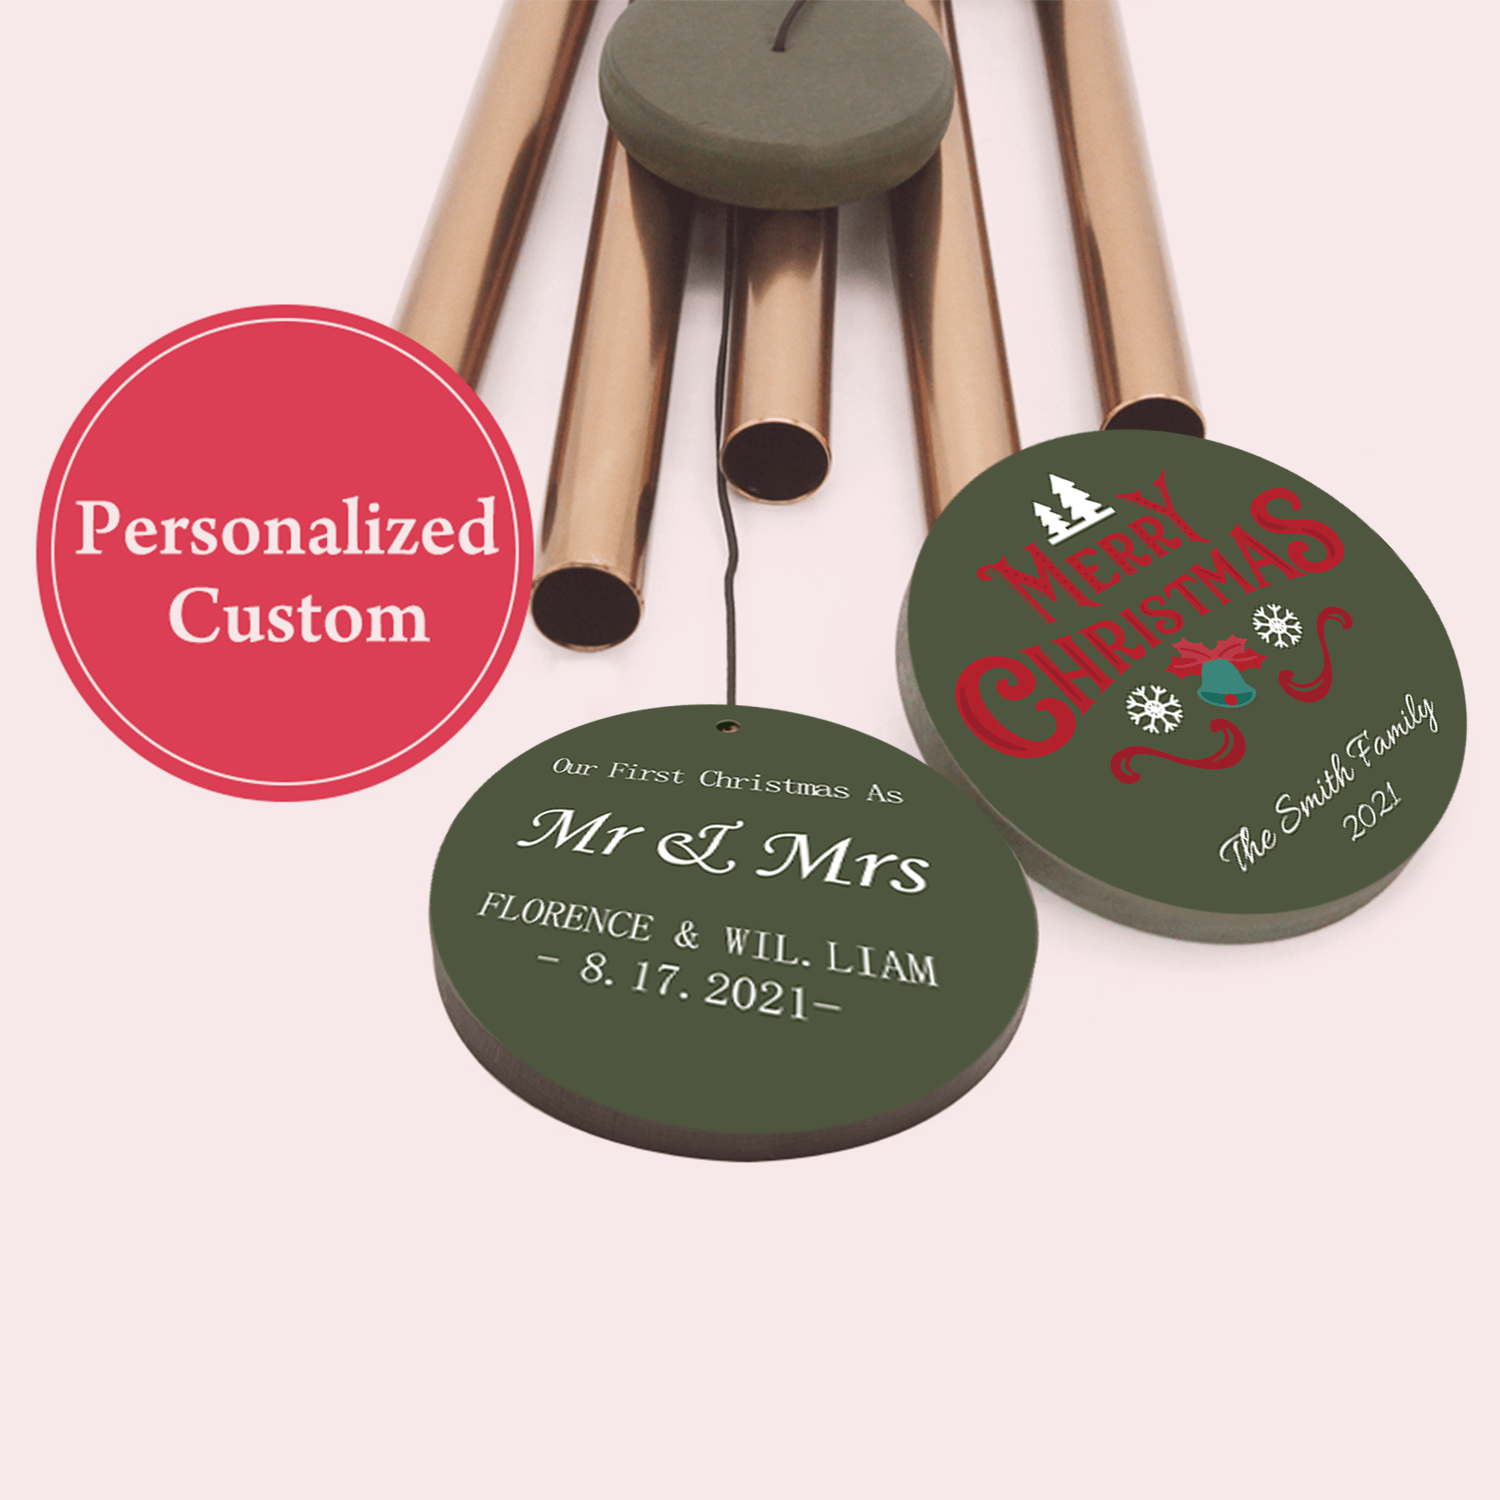 Personalized Christmas Wind Chimes-36 Inch, 5 Tubes, Gold-Disc Top,Christmas Gift